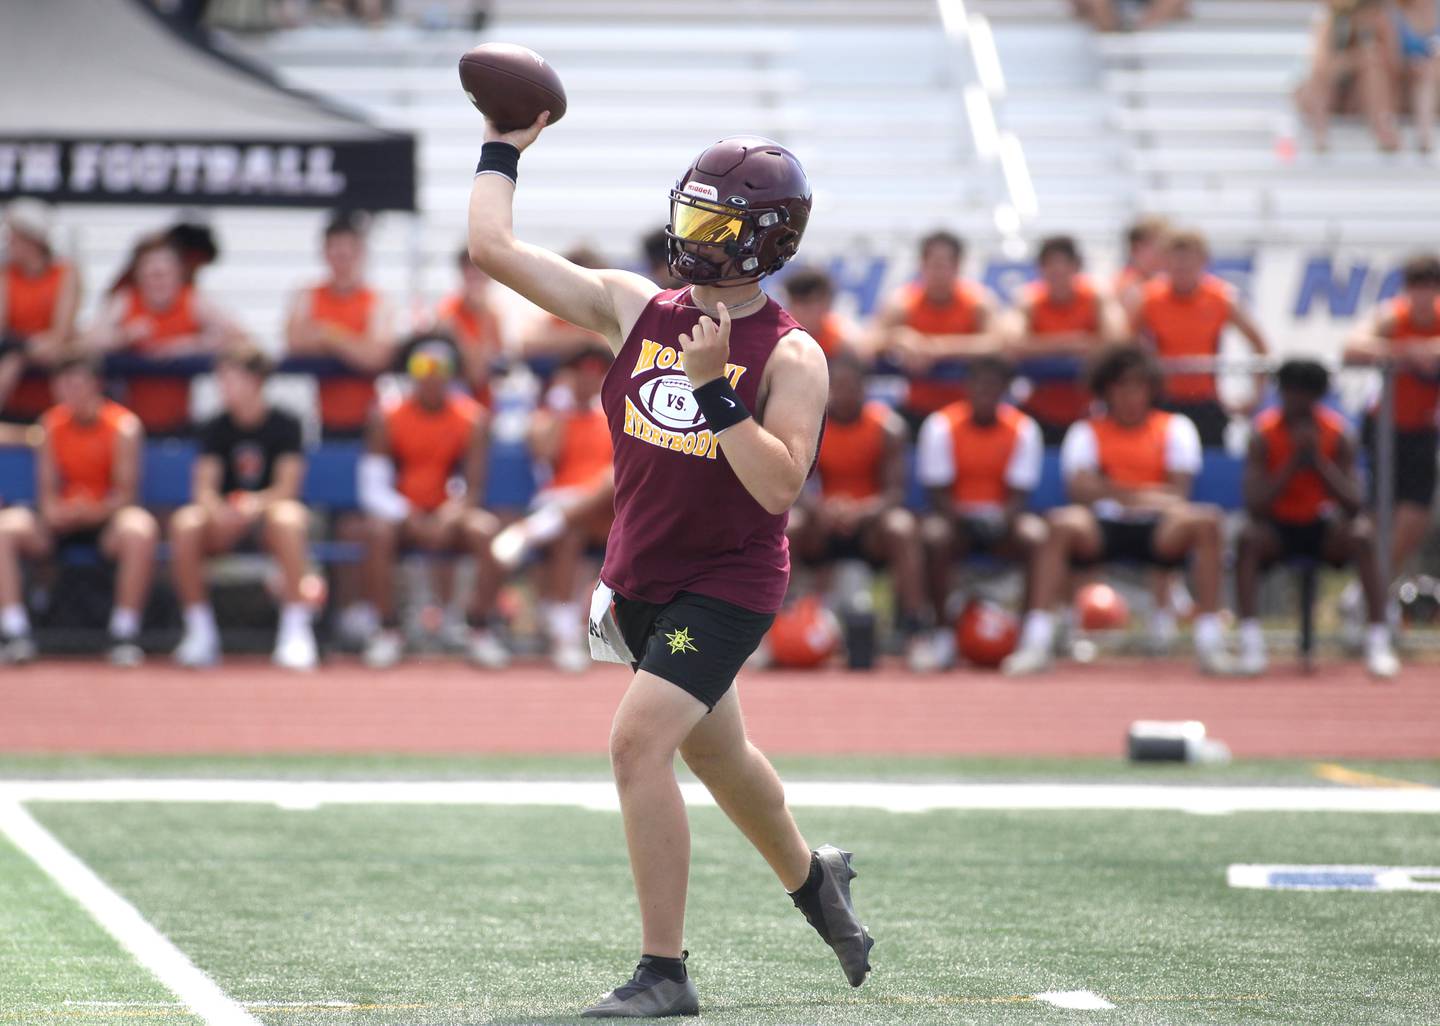 Montini quarterback Cole Teschner passes the ball during a 7 on 7 tournament at St. Charles North High School on Thursday, June 30, 2022.